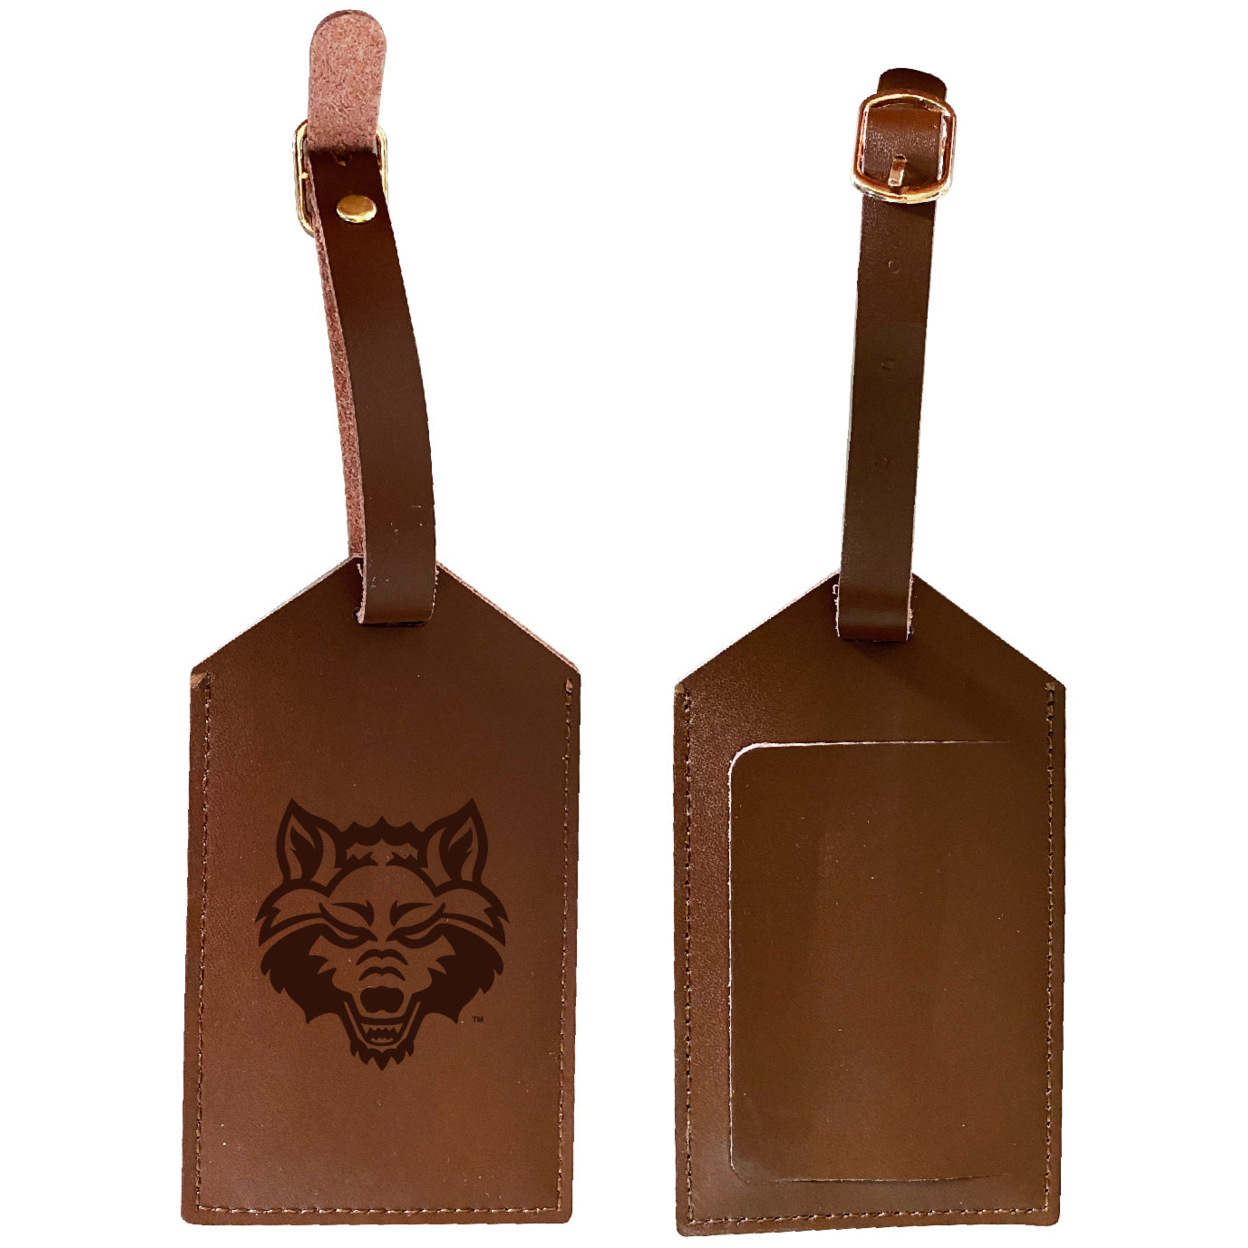 Arkansas State Leather Luggage Tag Engraved